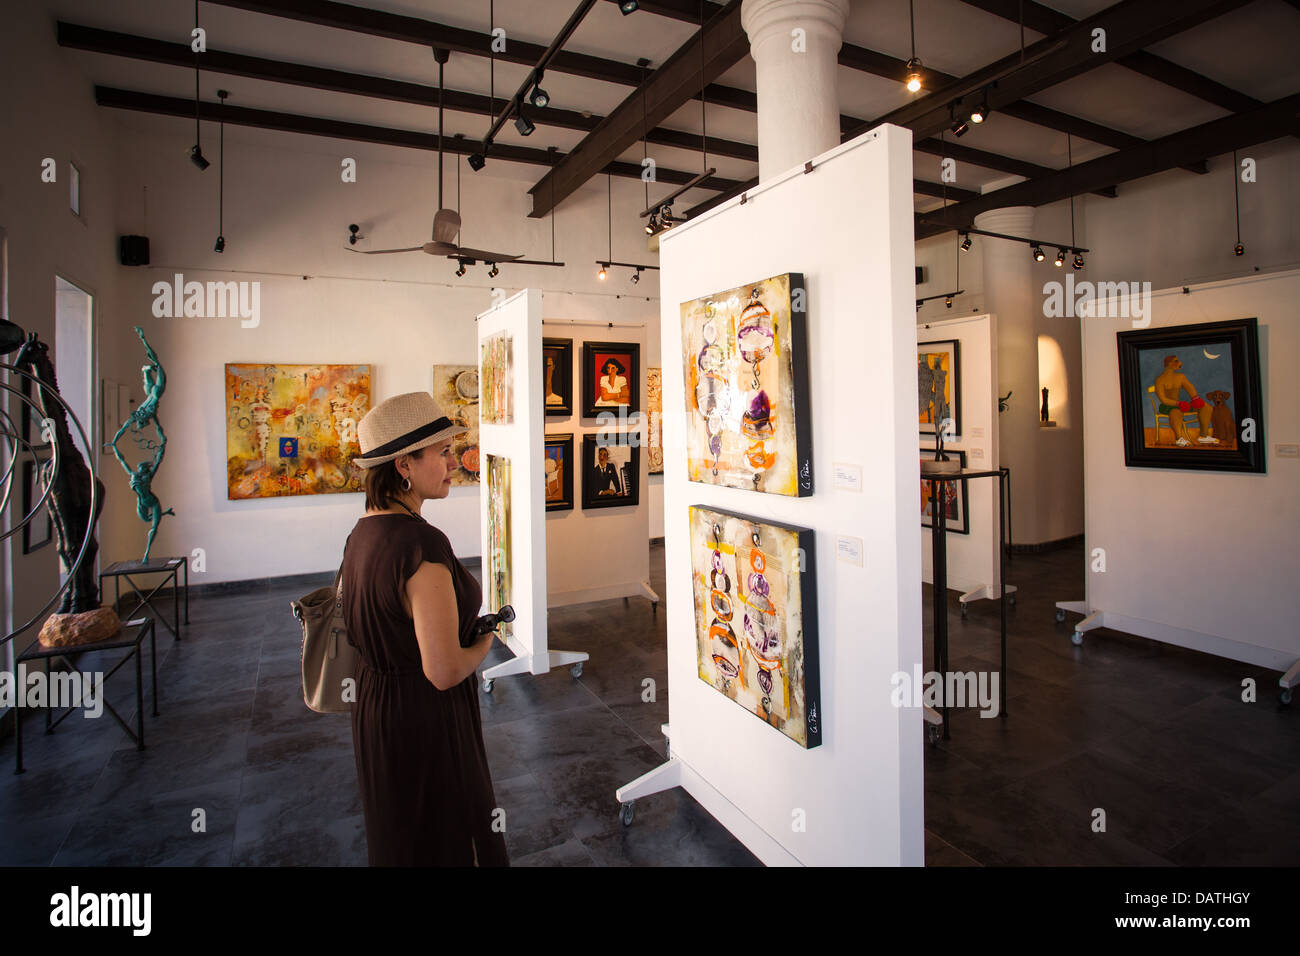 The Contempo Gallery is one of several in the Zona Romantica section of Puerto Vallarta, Mexico. Stock Photo